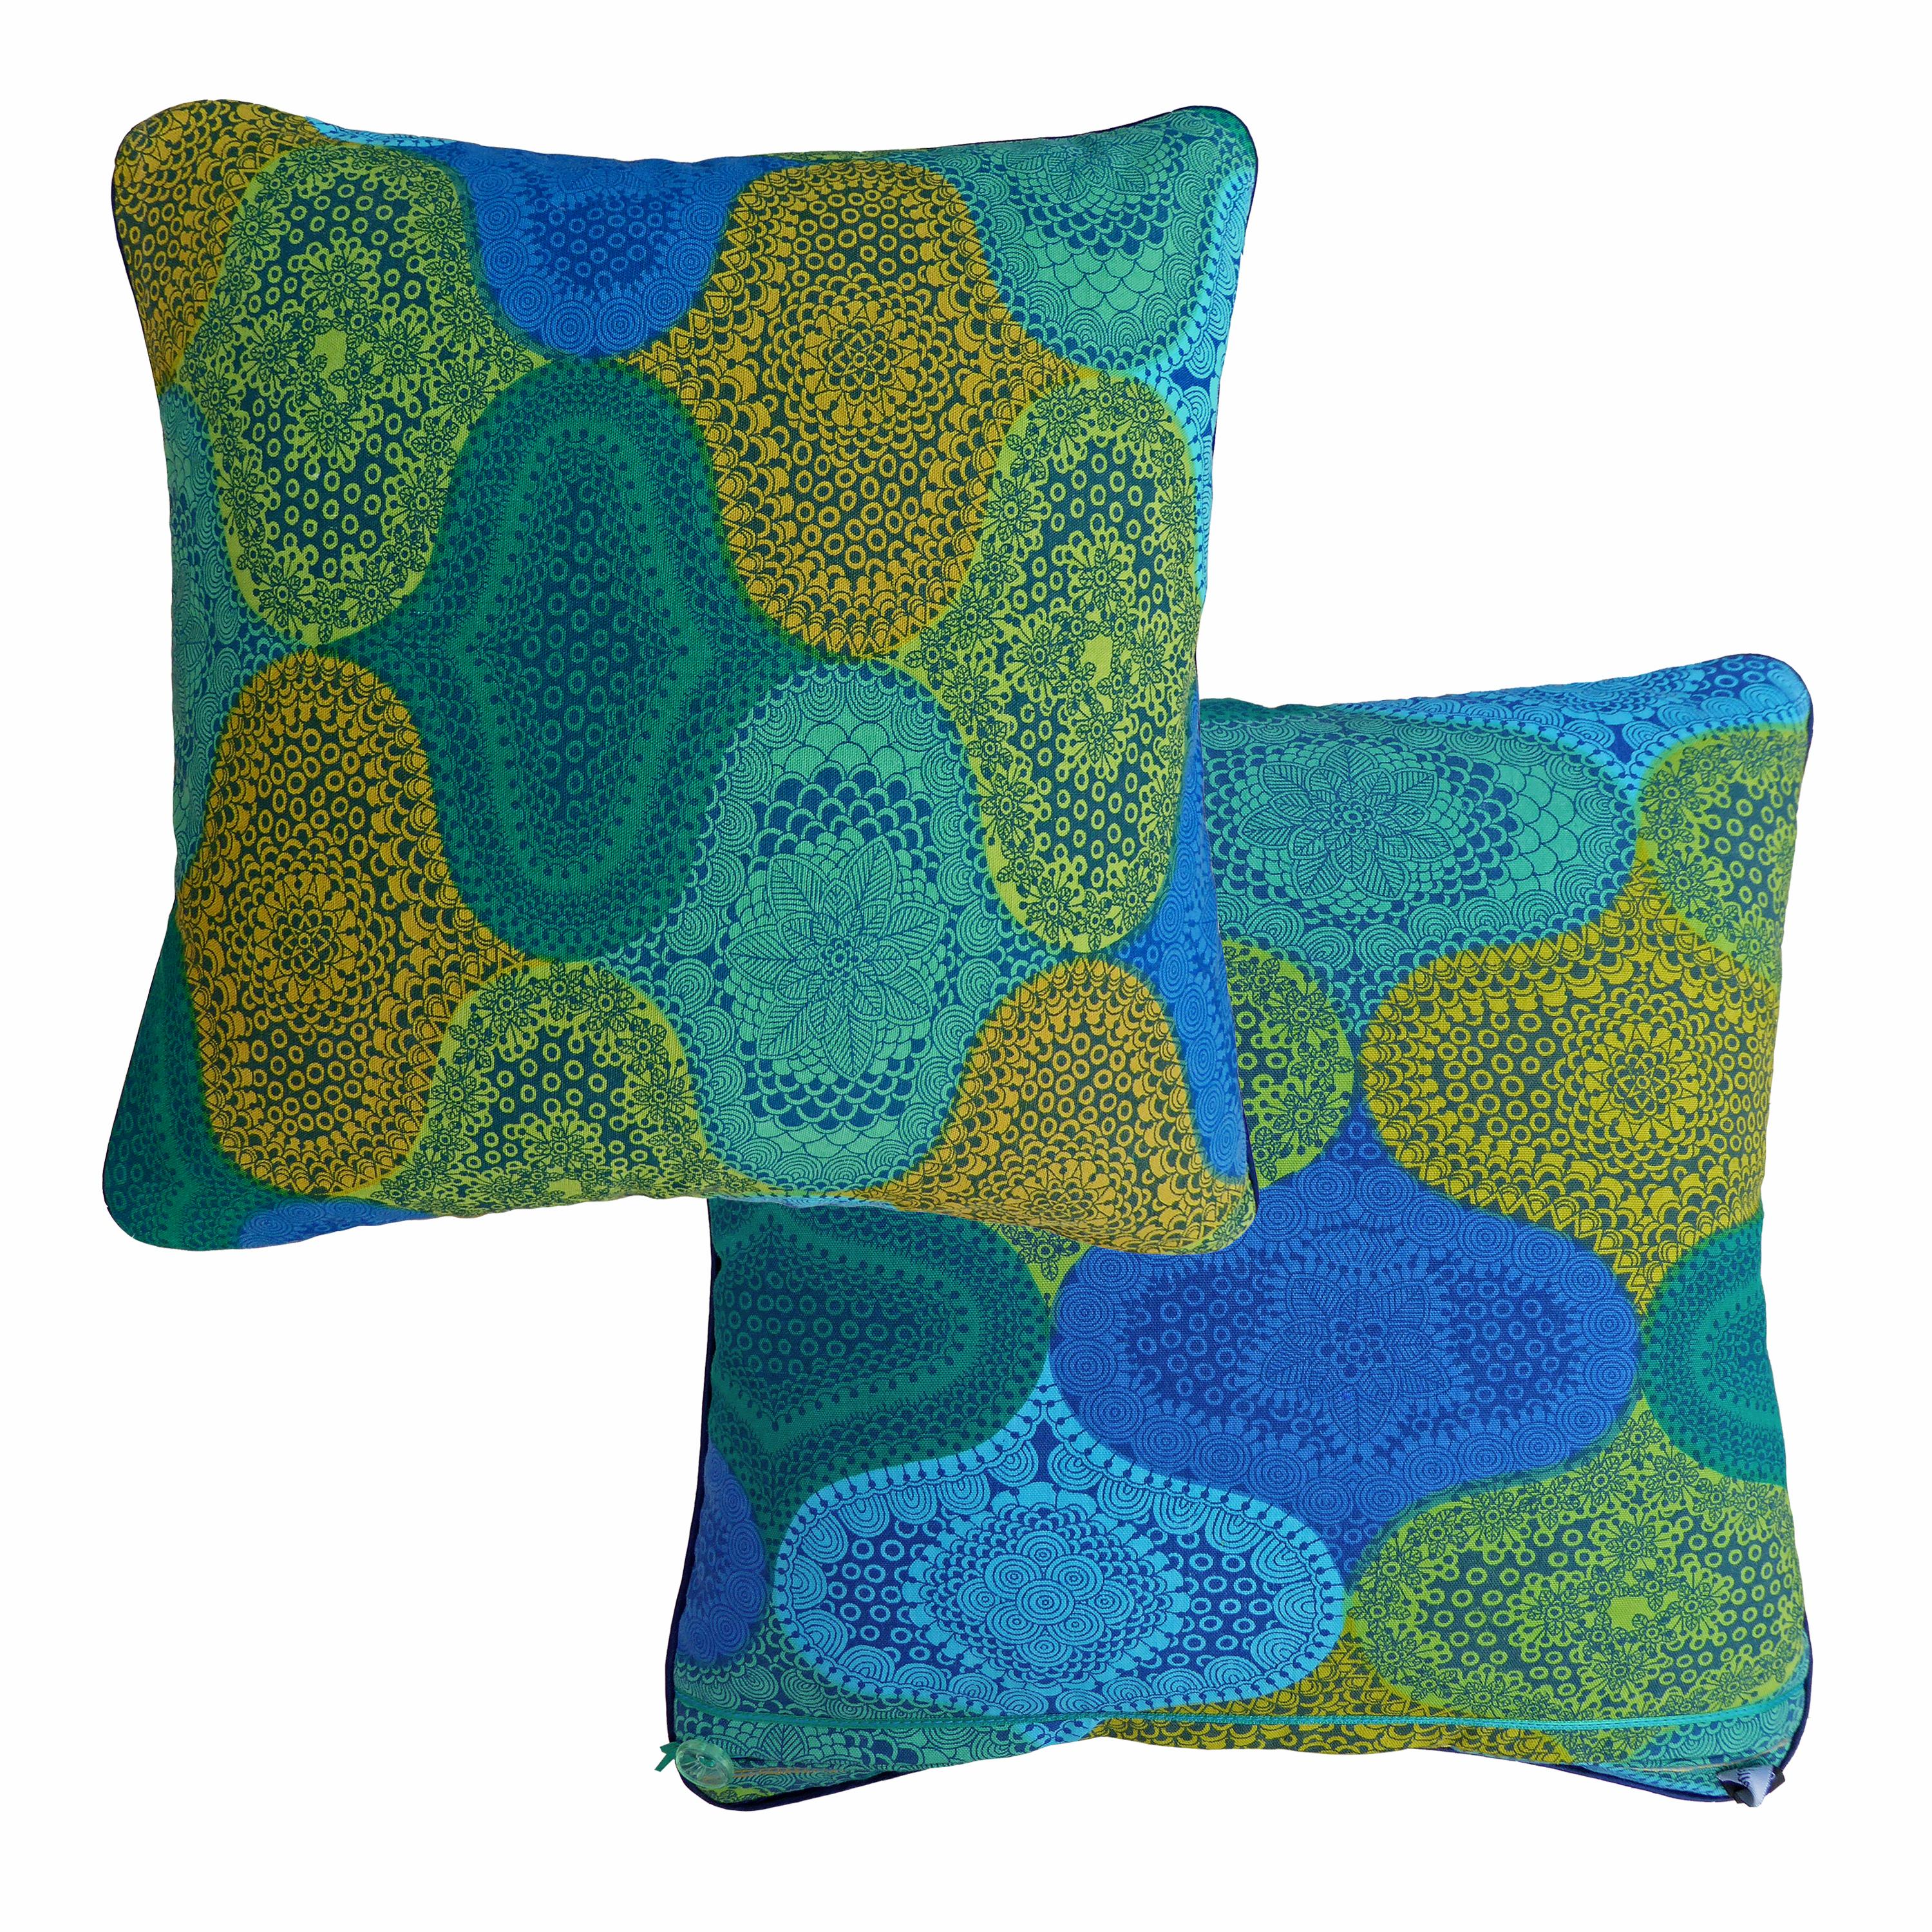 Mid-Century Modern Vintage Cushions Bespoke Made Midcentury Fabric Pillow Alhambra Made in London